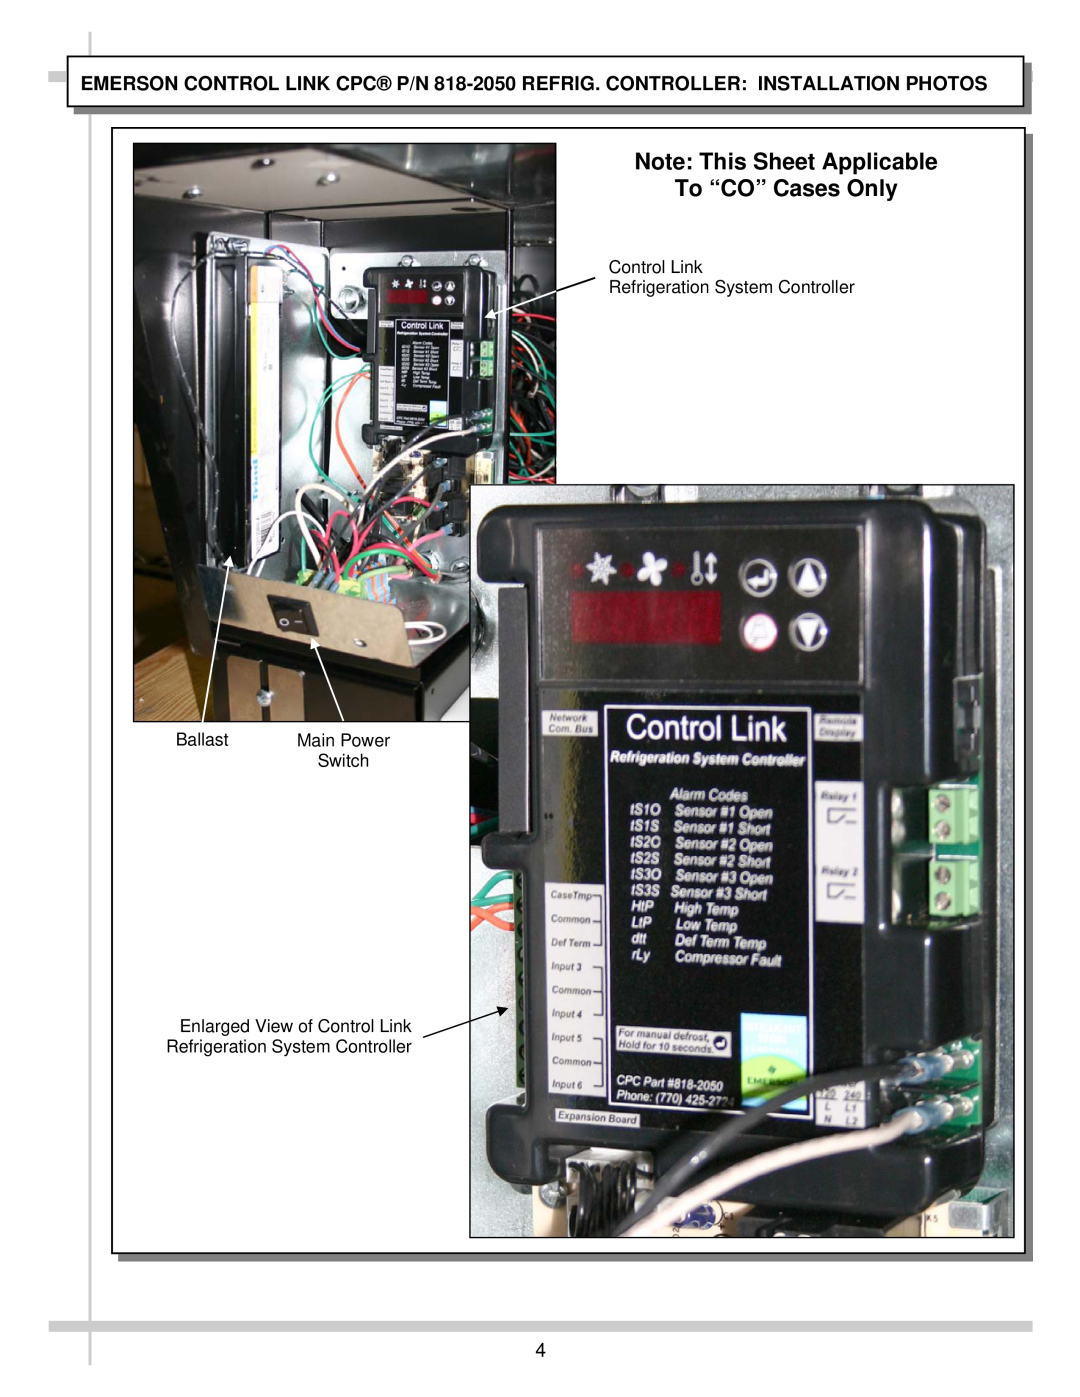 Emerson CL-RSC manual Note This Sheet Applicable To “CO” Cases Only, Control Link Refrigeration System Controller, Ballast 